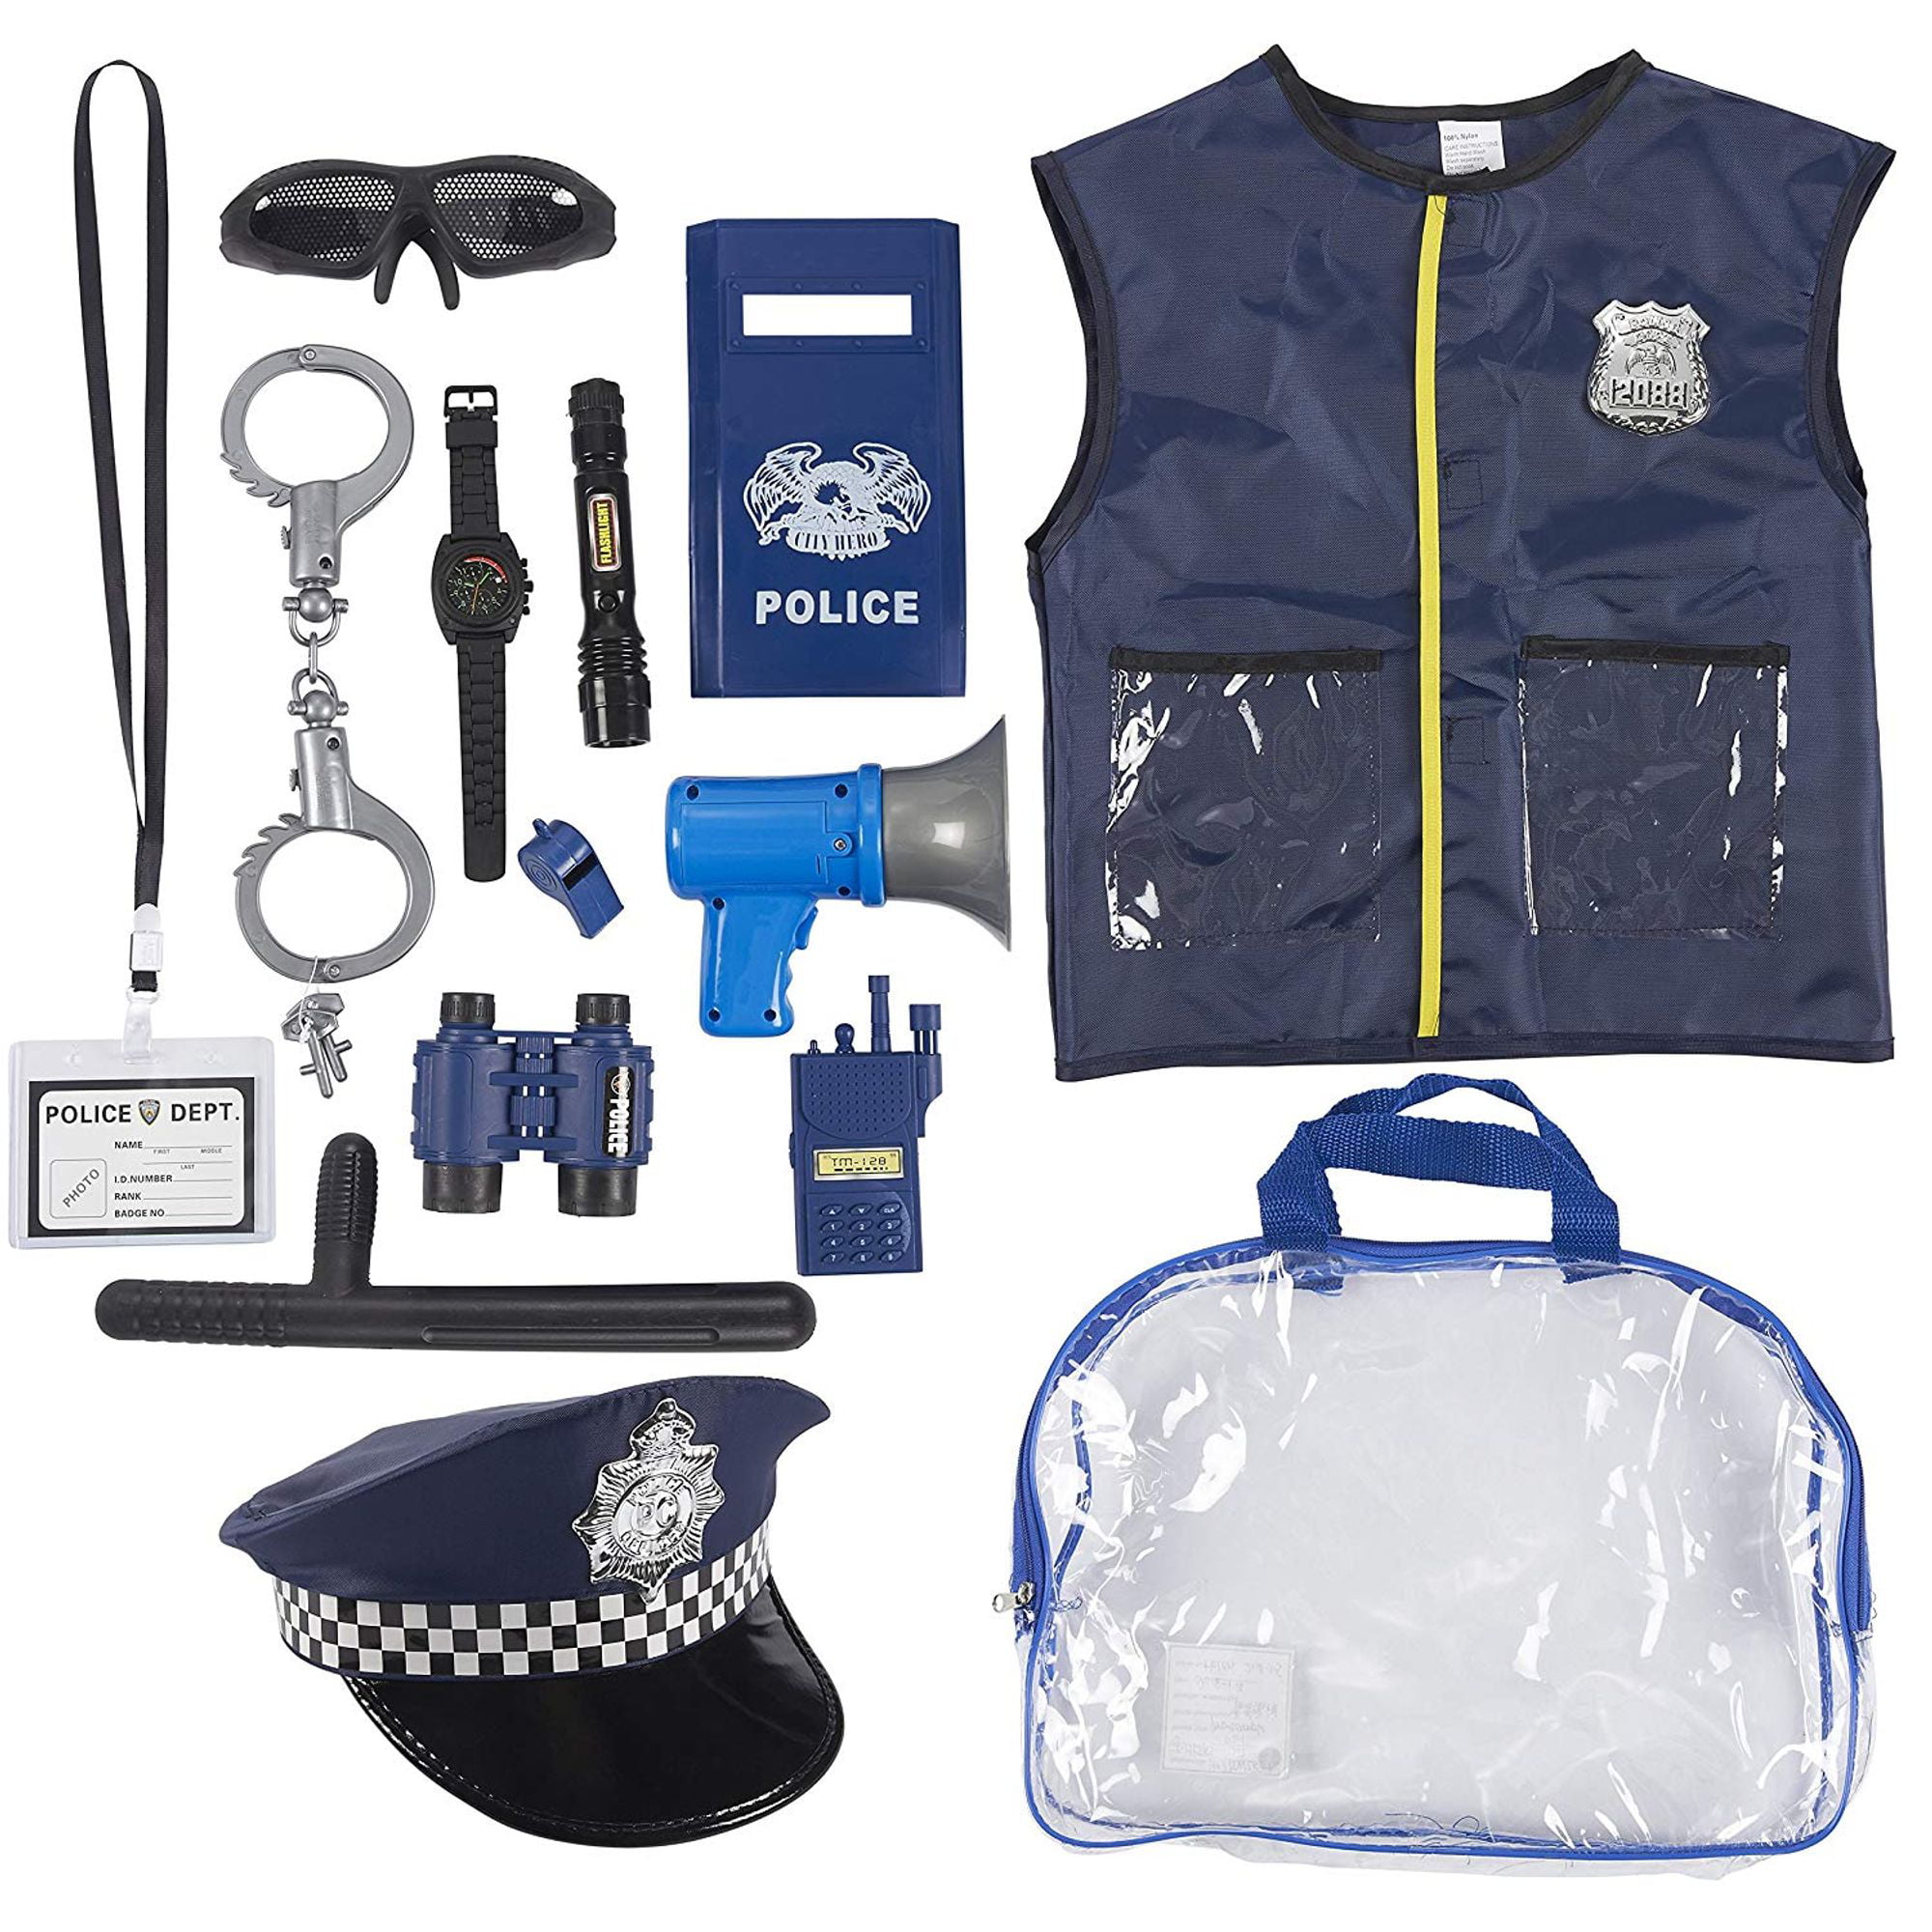 14 Pieces Set Police Officer Play Kit for School Kids Boys Halloween Pretend Dress Up Costume with Hat, Vest, Handcuffs, Accessories